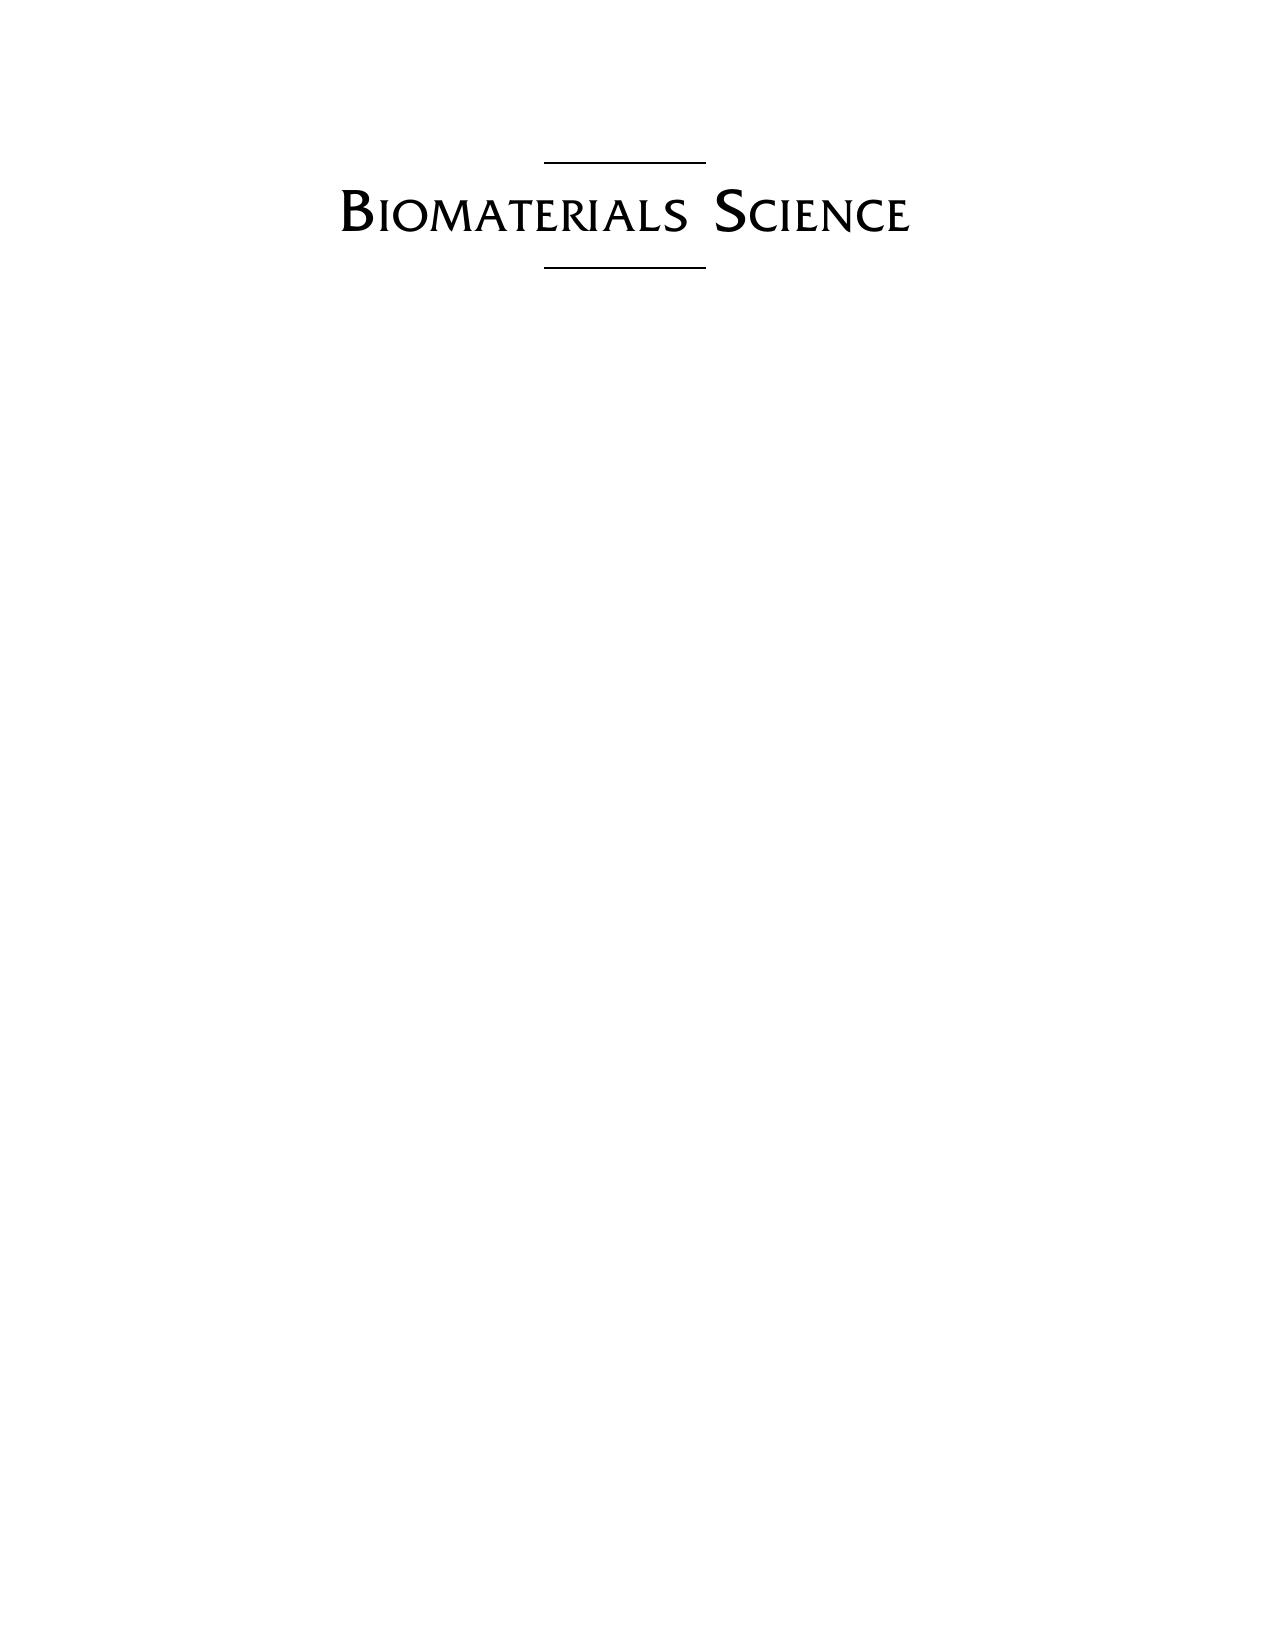 Biomaterials science an introduction materials in Medicine 2nd ed 2004)